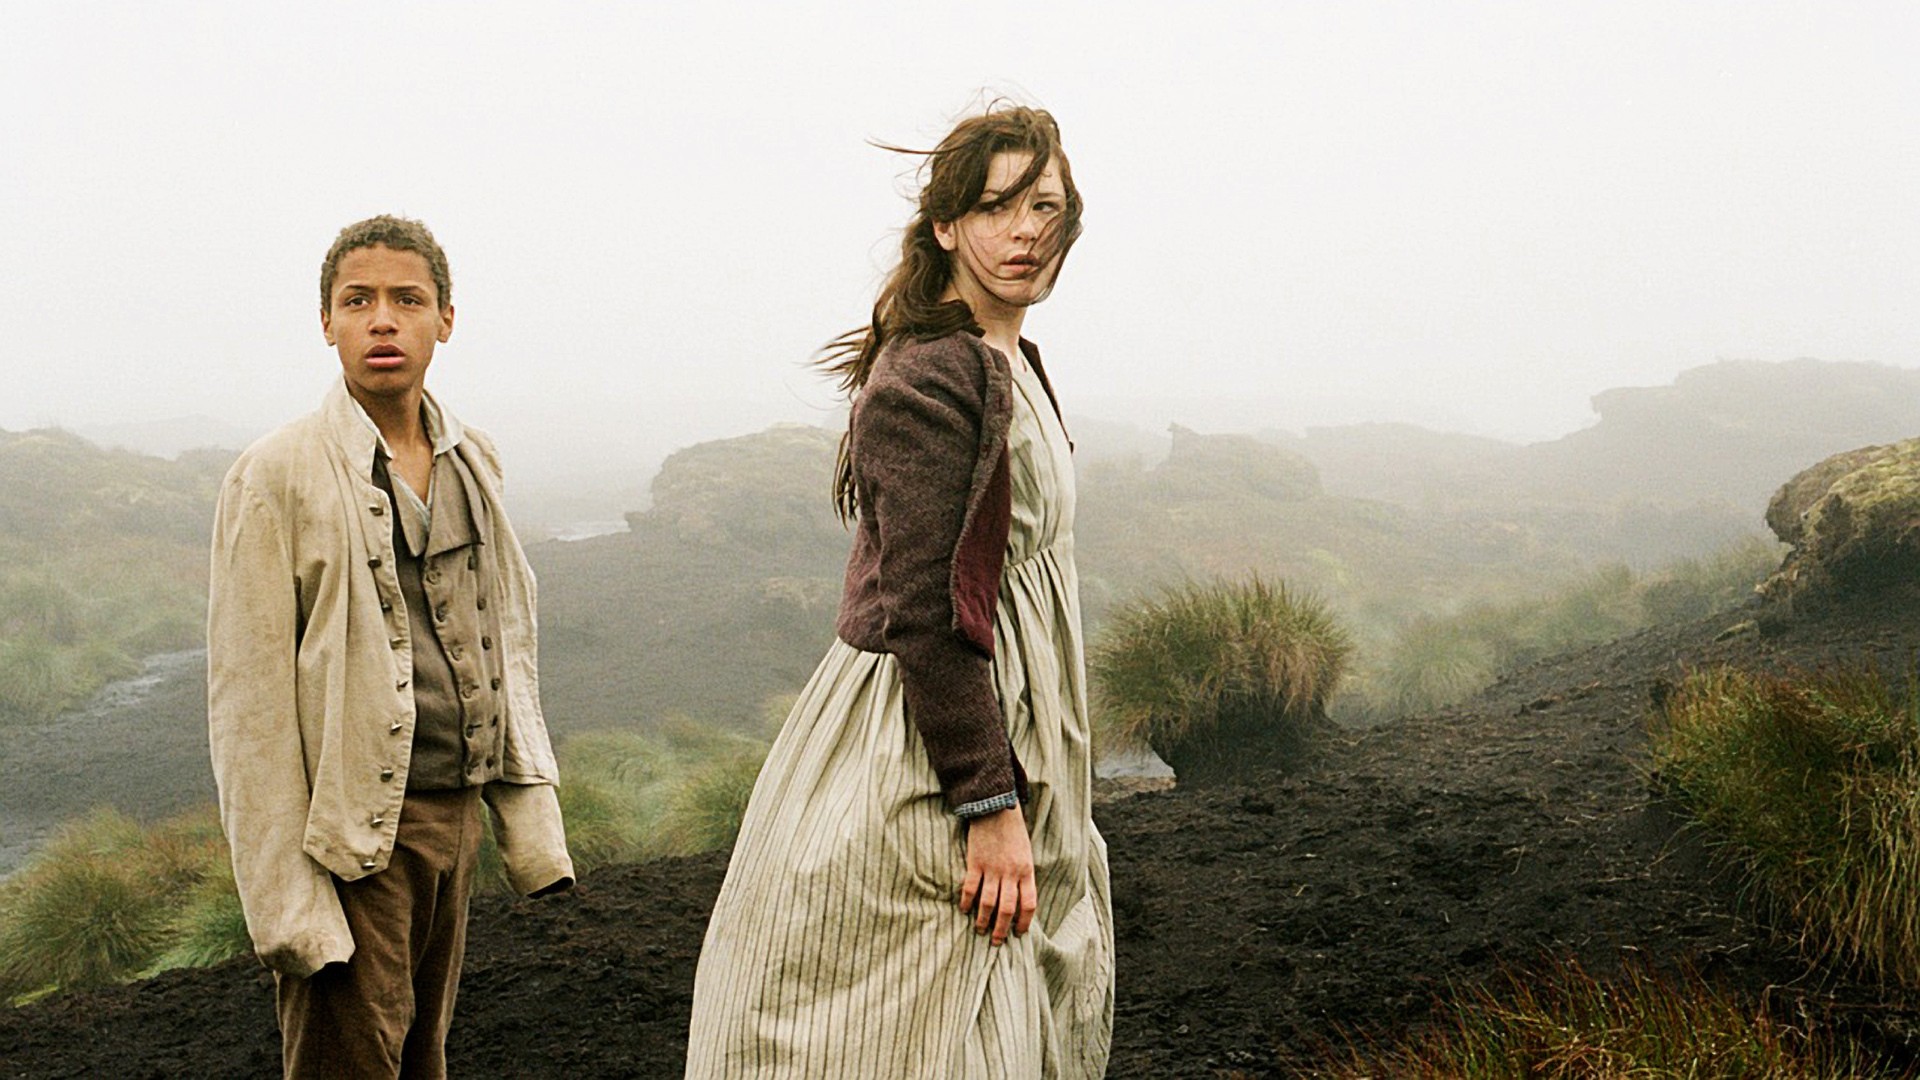 Solomon Glave stars as Young Heathcliff and Shannon Beer stars as Young Catherine Earnshaw in Oscilloscope Laboratories' Wuthering Heights (2012)